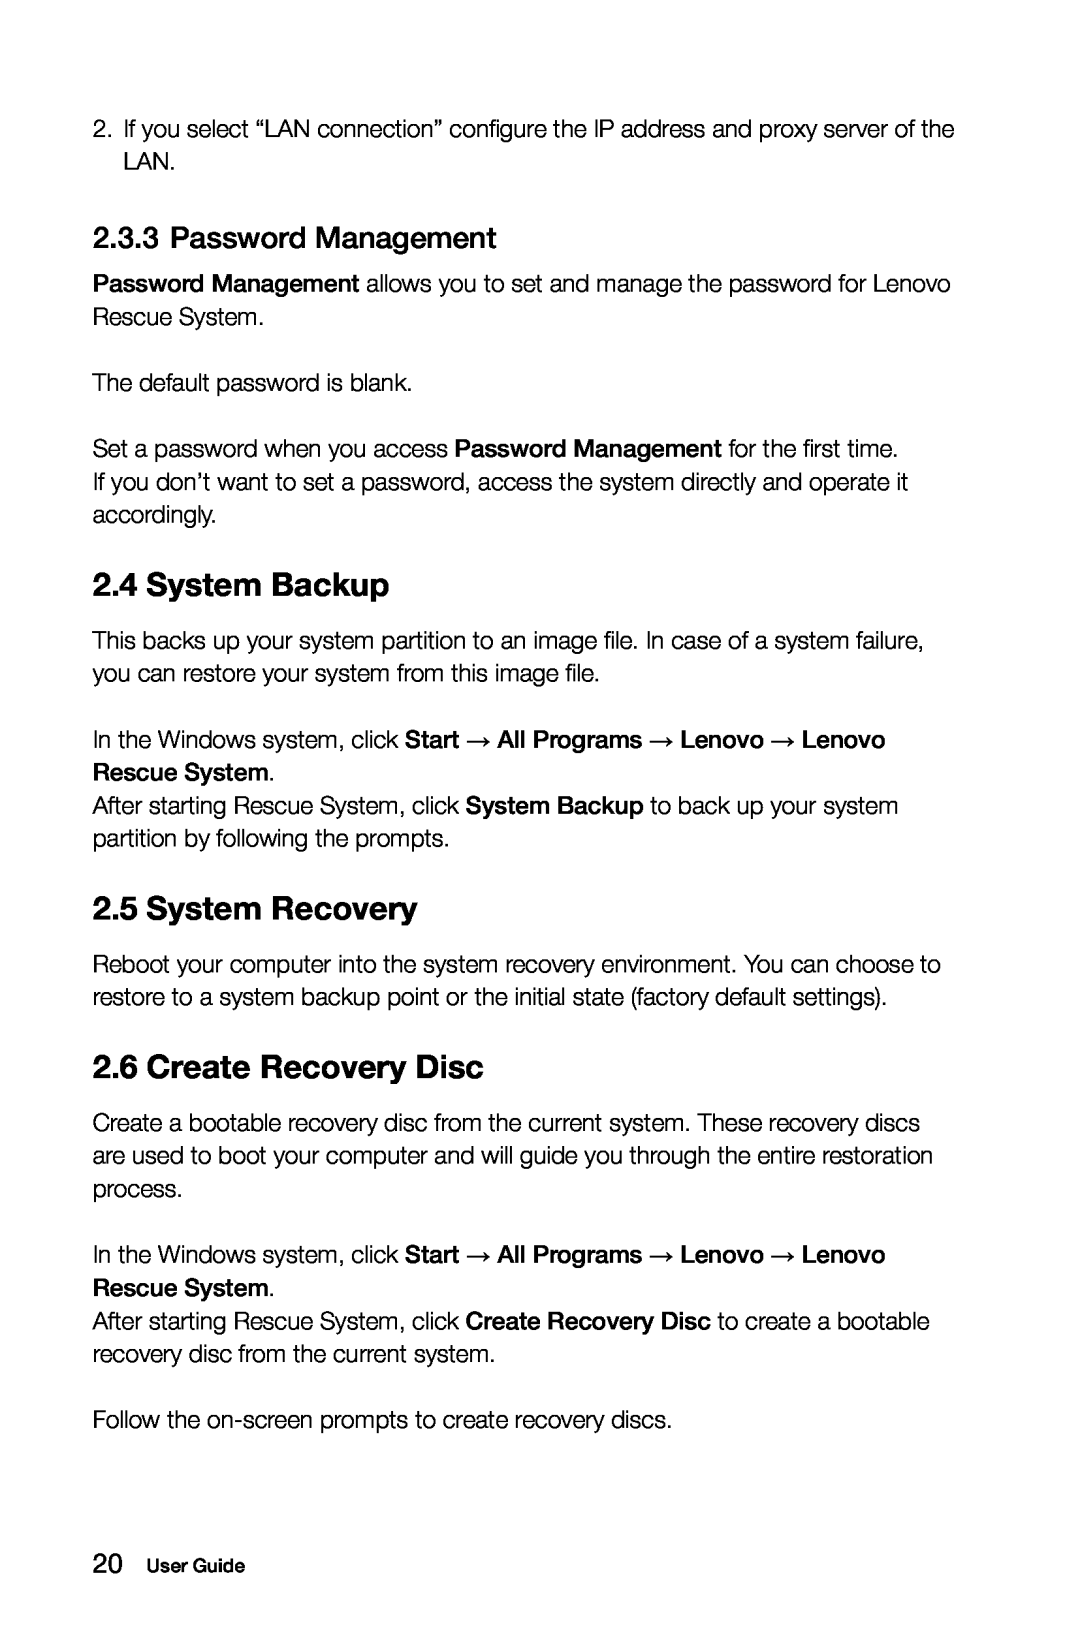 Lenovo 10067/7748, 10073/1169, 10066/7747 manual System Backup, System Recovery, Create Recovery Disc, Password Management 